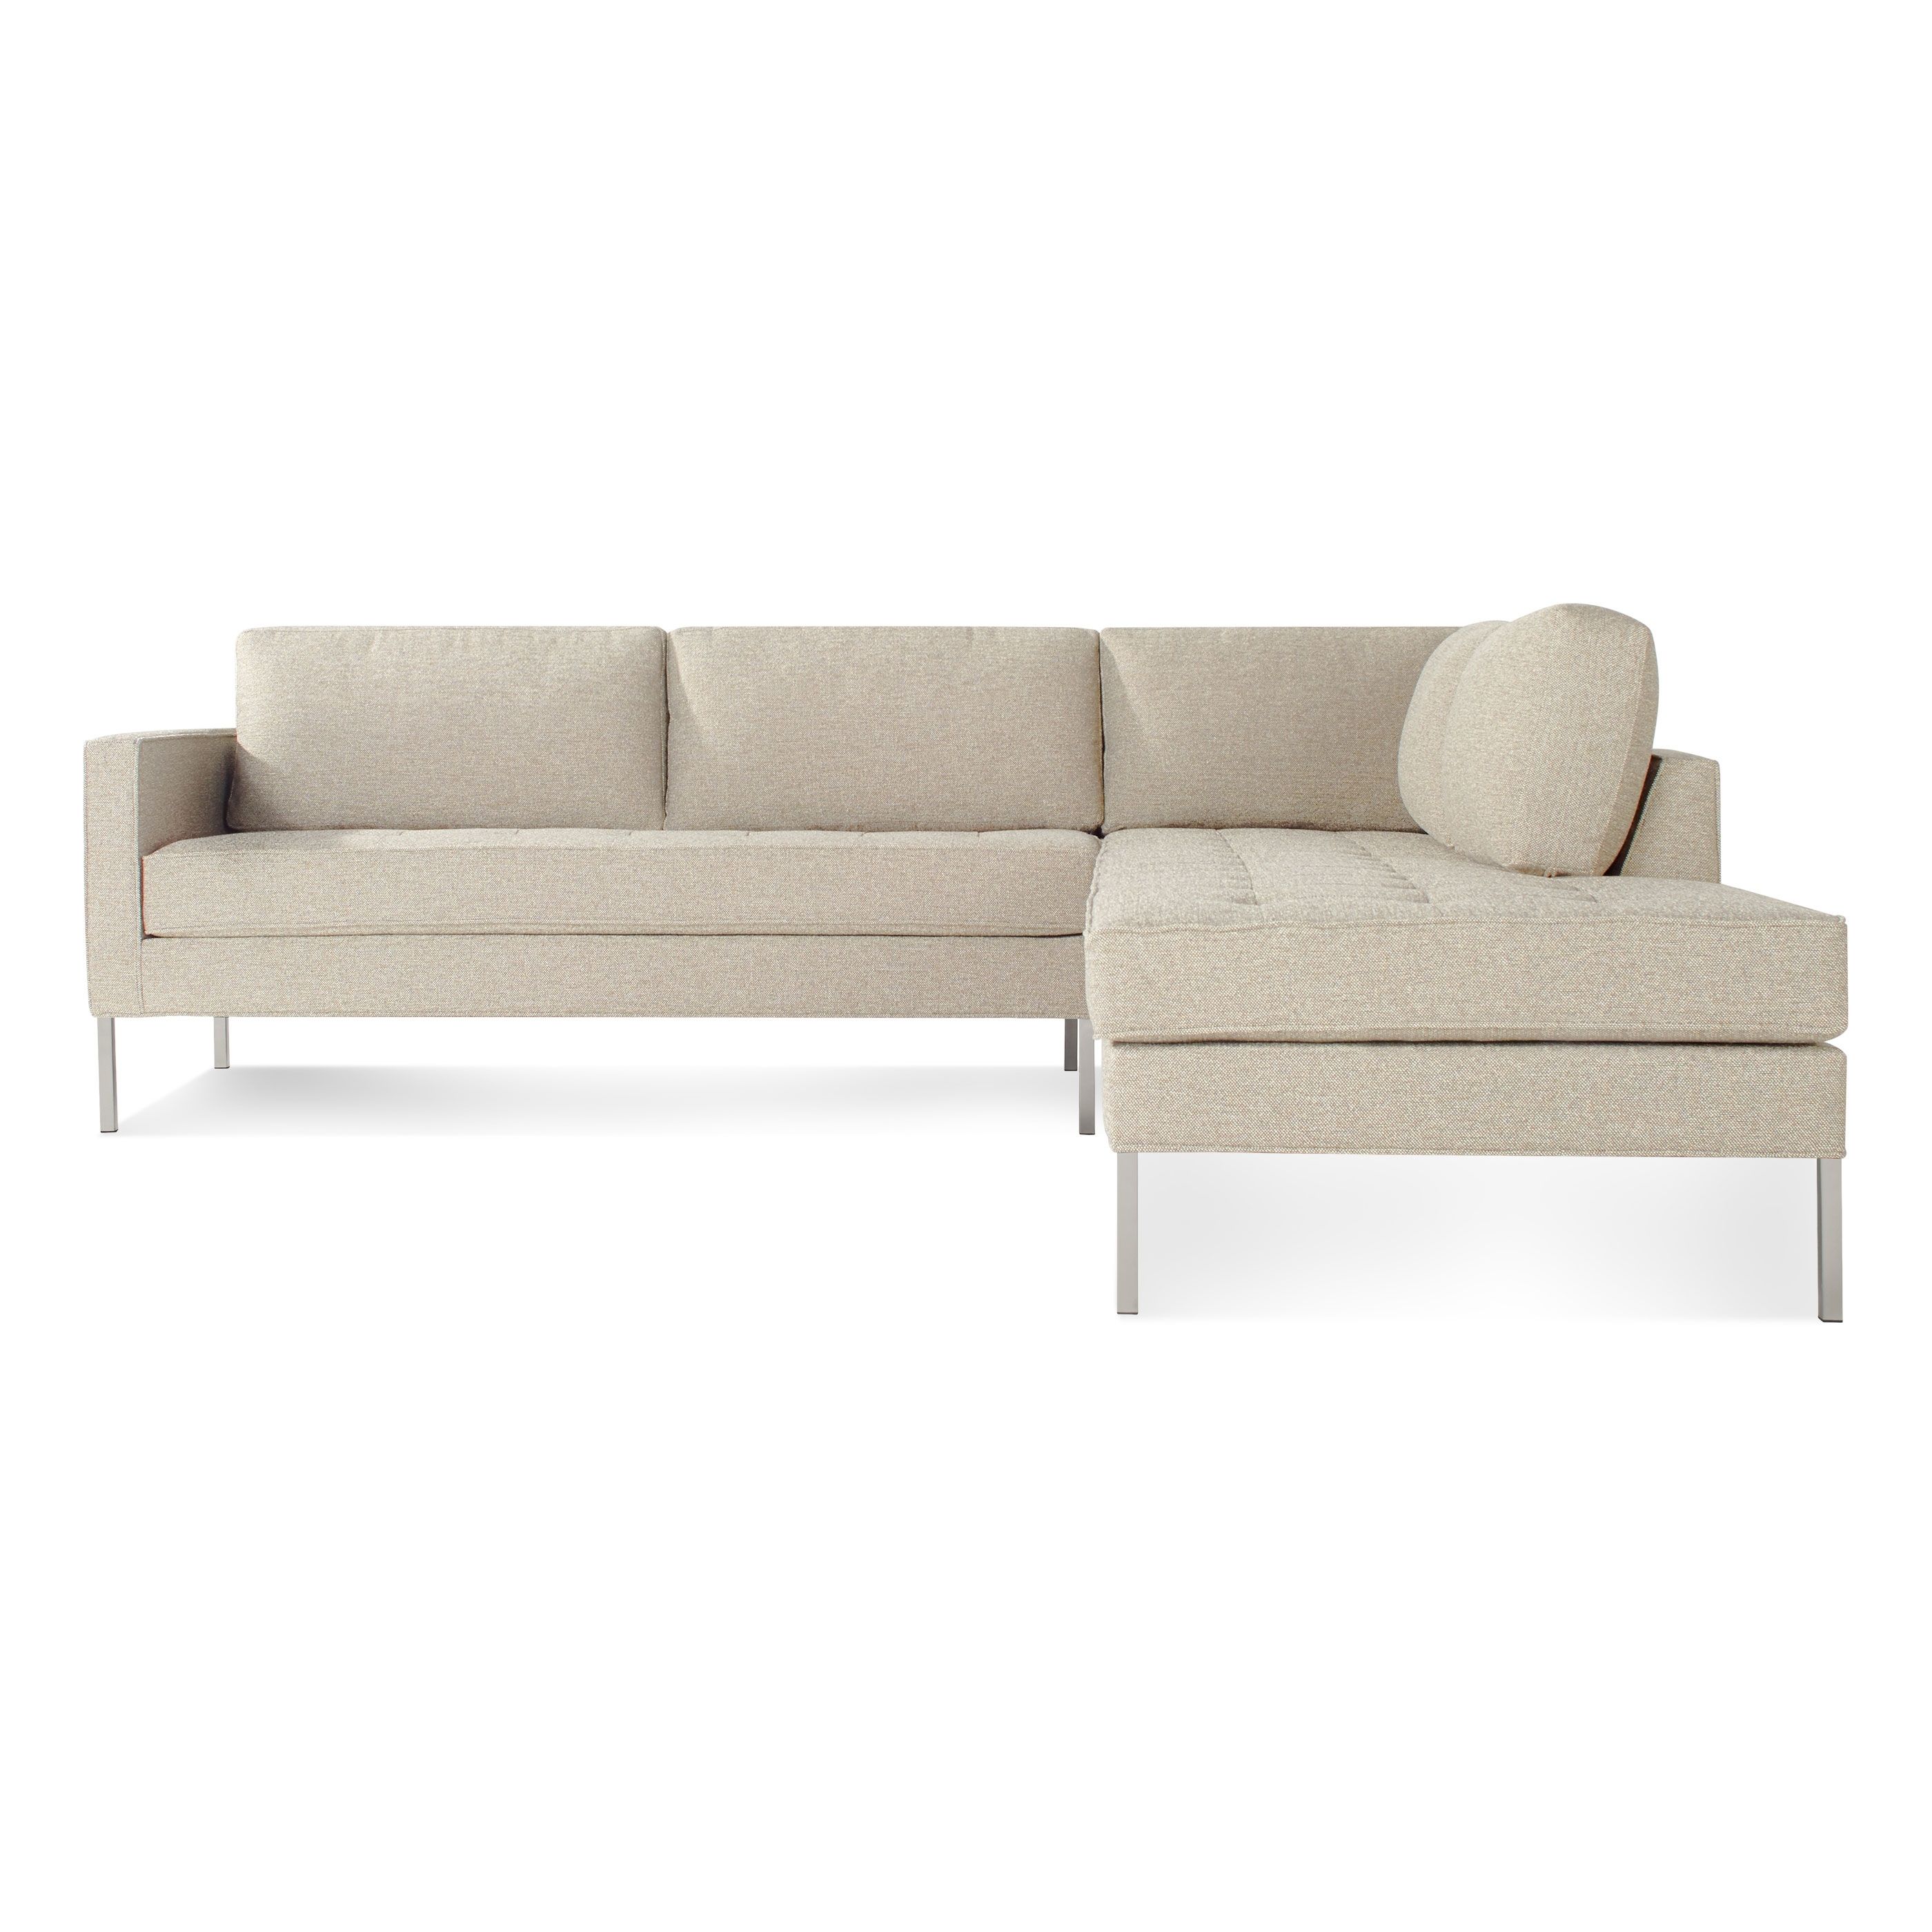 Fashionable Newfoundland Sectional Sofas Throughout Paramount Left Sectional Sofa – Modern Designer Sofas (View 1 of 15)